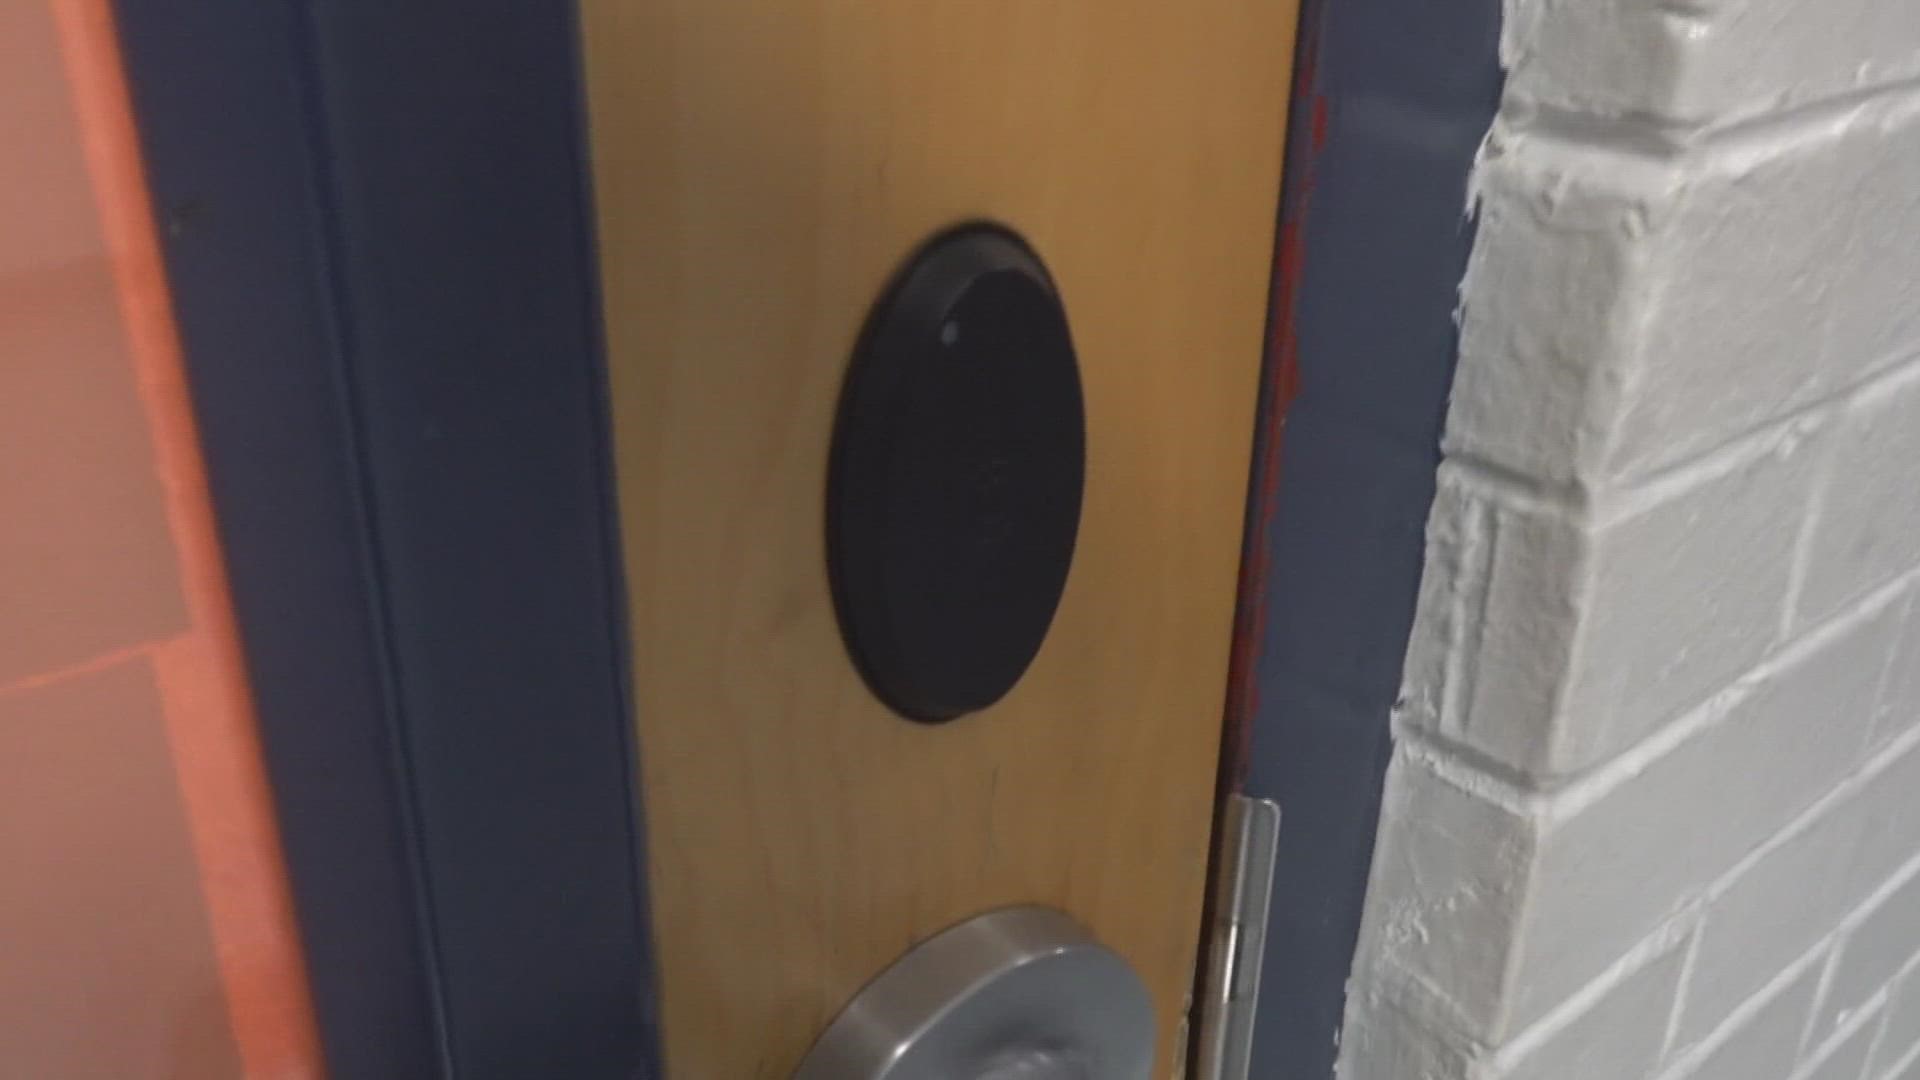 Anderson County Schools is upgrading its security measures to ensure students are safe while on-campus.